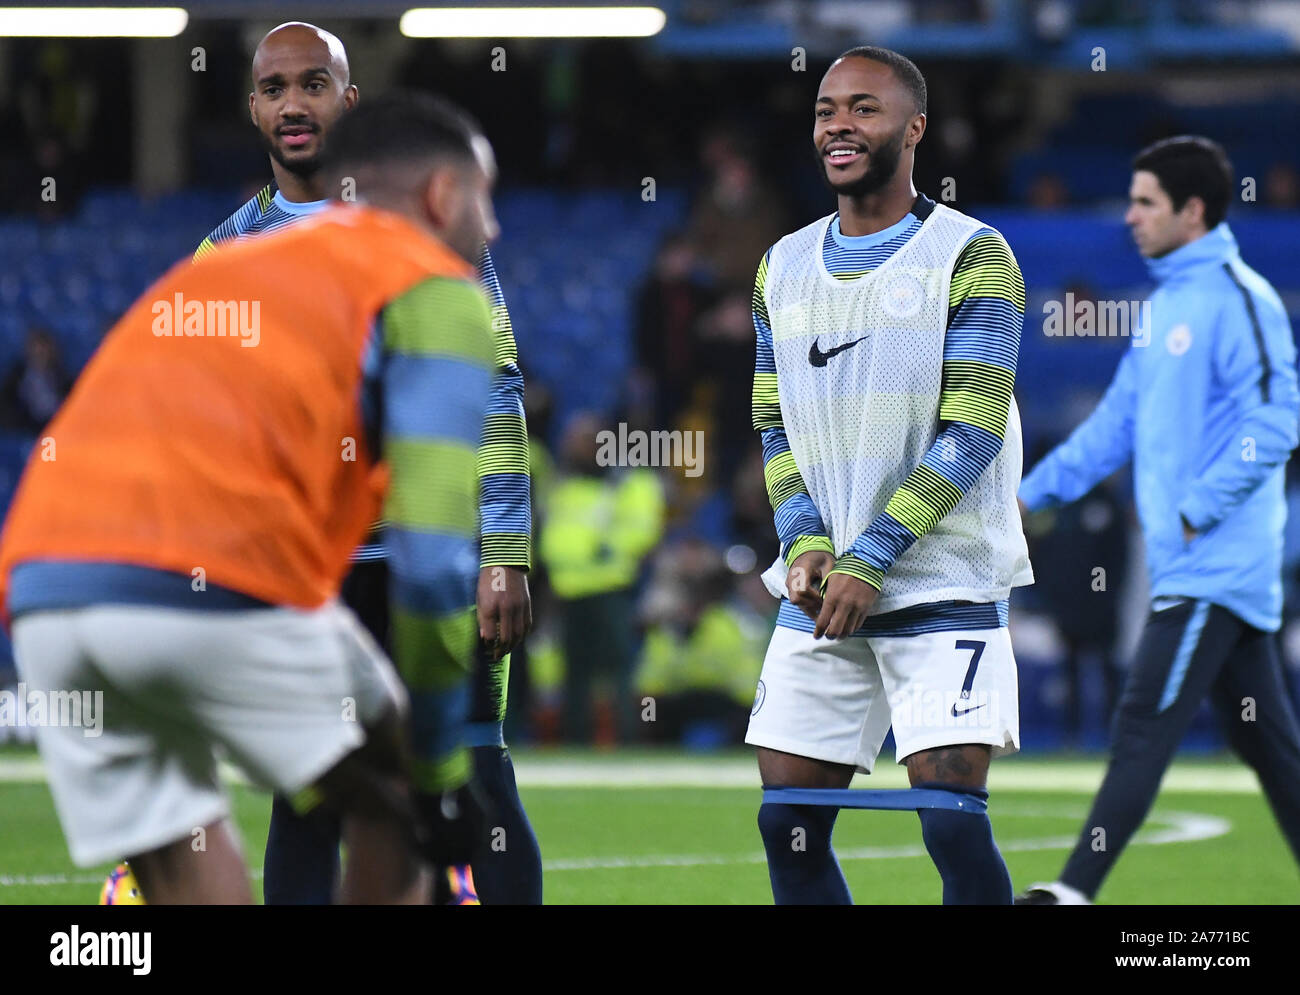 LONDON, ENGLAND - DECEMBER 8, 2018: Raheem Sterling of City pictured prior to the 2018/19 Premier League game between Chelsea FC and Manchester City at Stamford Bridge. Stock Photo